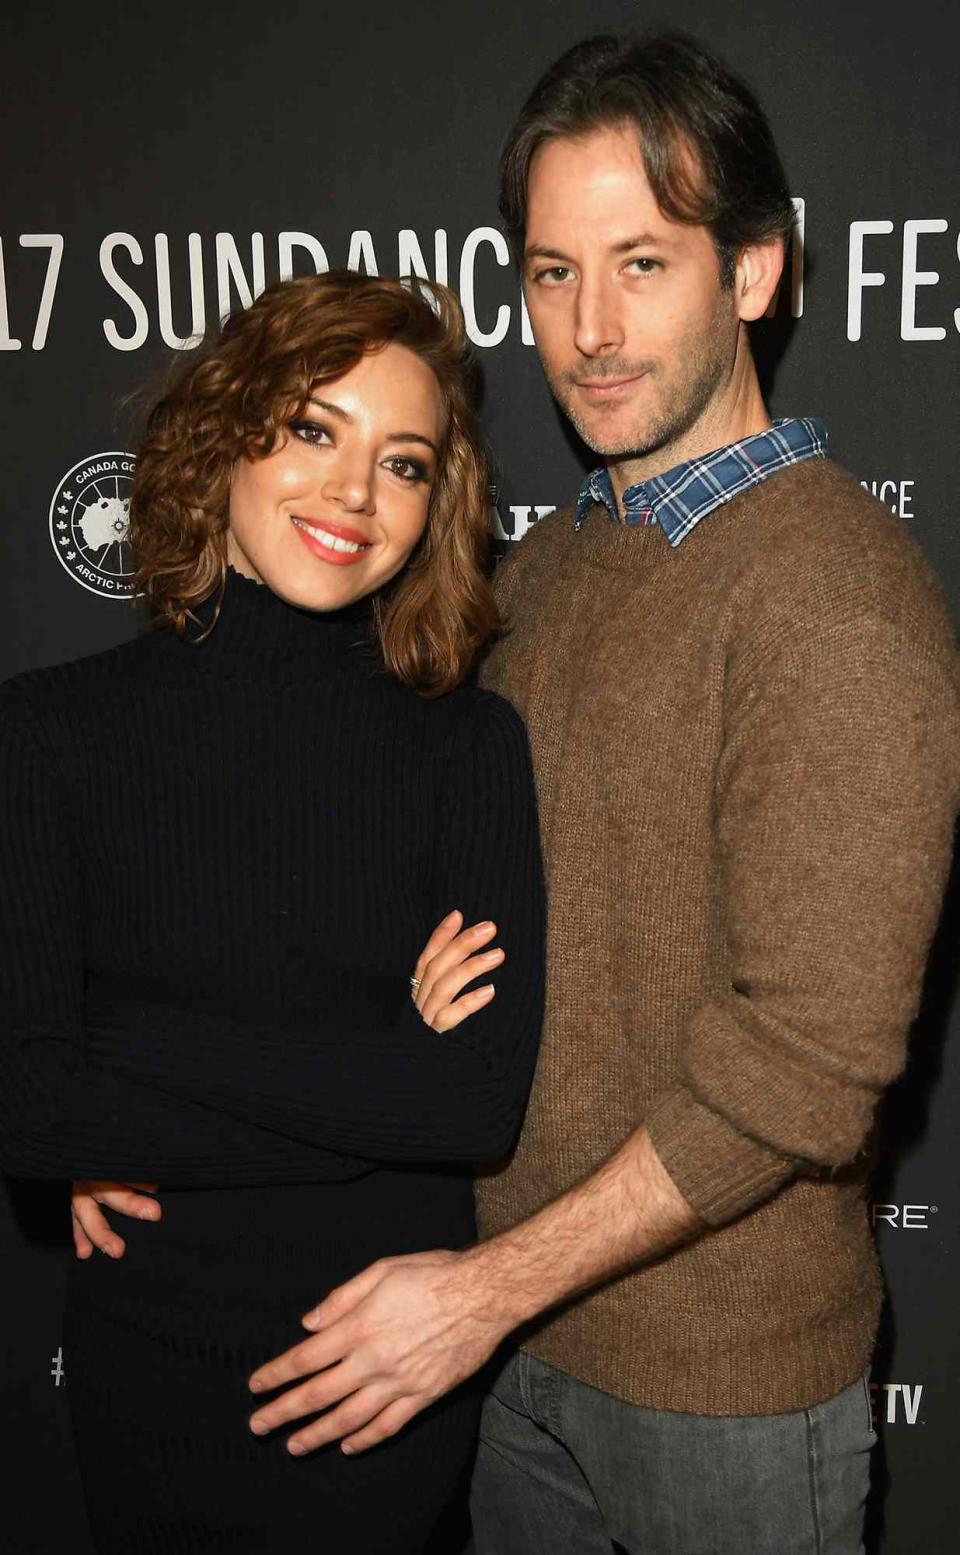 Aubrey Plaza (L) and director Jeff Baena attend "The Little Hours" premiere during day 1 of the 2017 Sundance Film Festival at Library Center Theater on January 19, 2017 in Park City, Utah